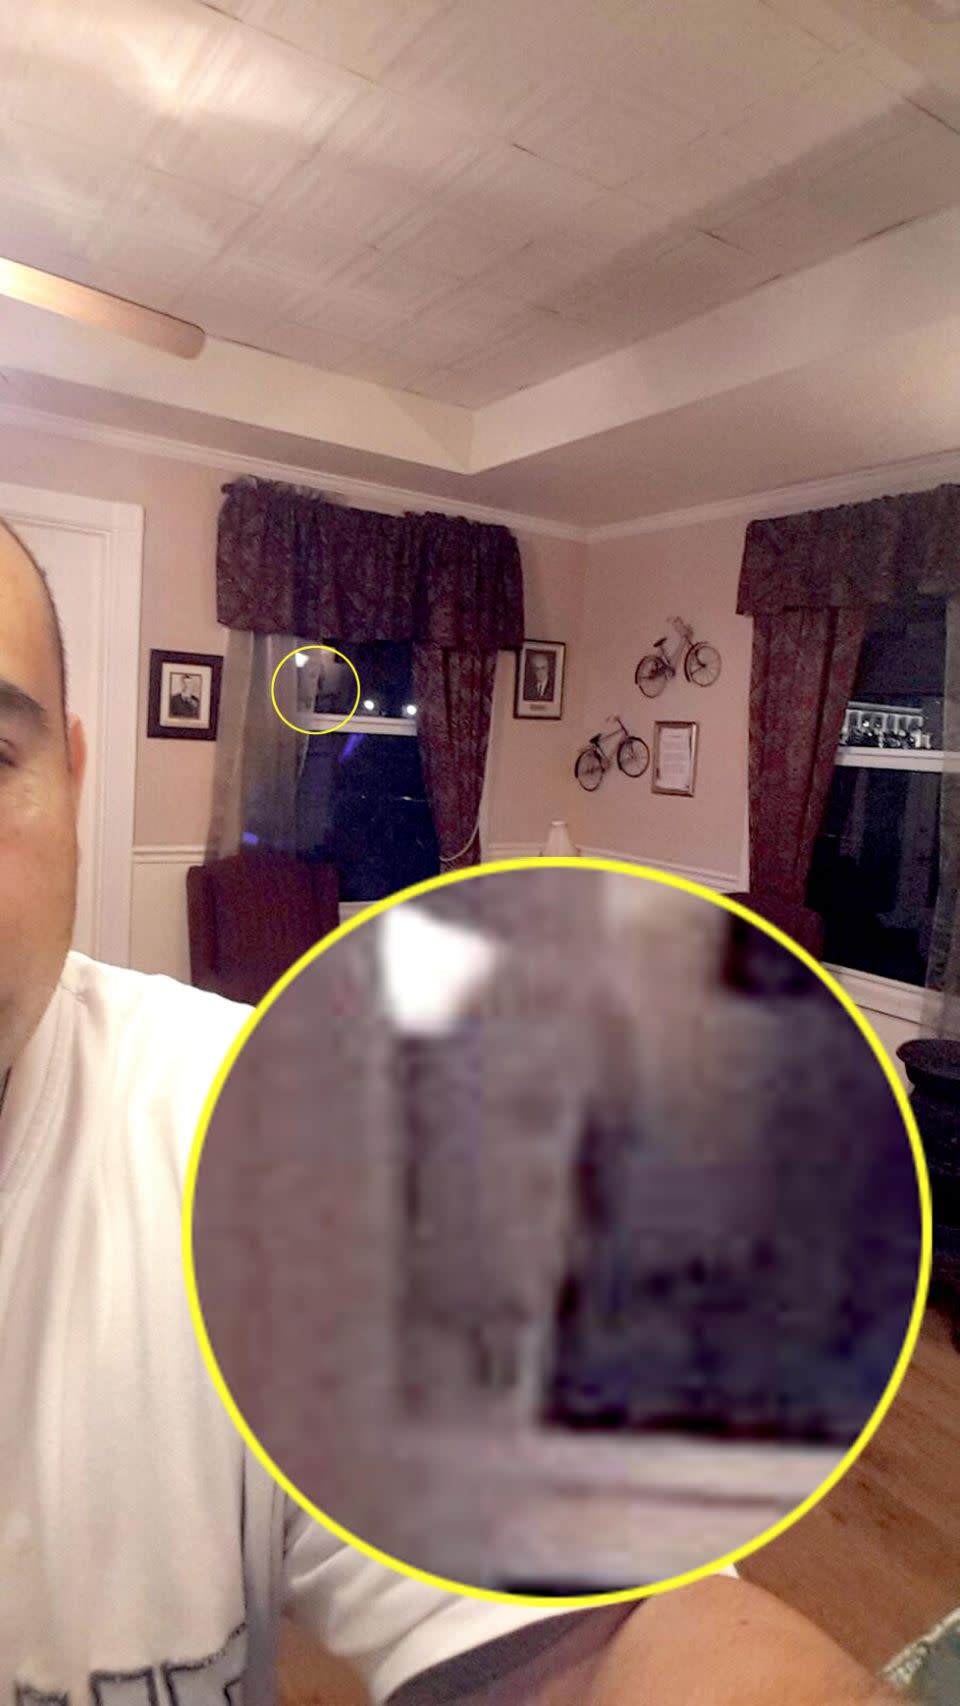 He spotted the 'ghost face' in the selfie. Photo: Caters News